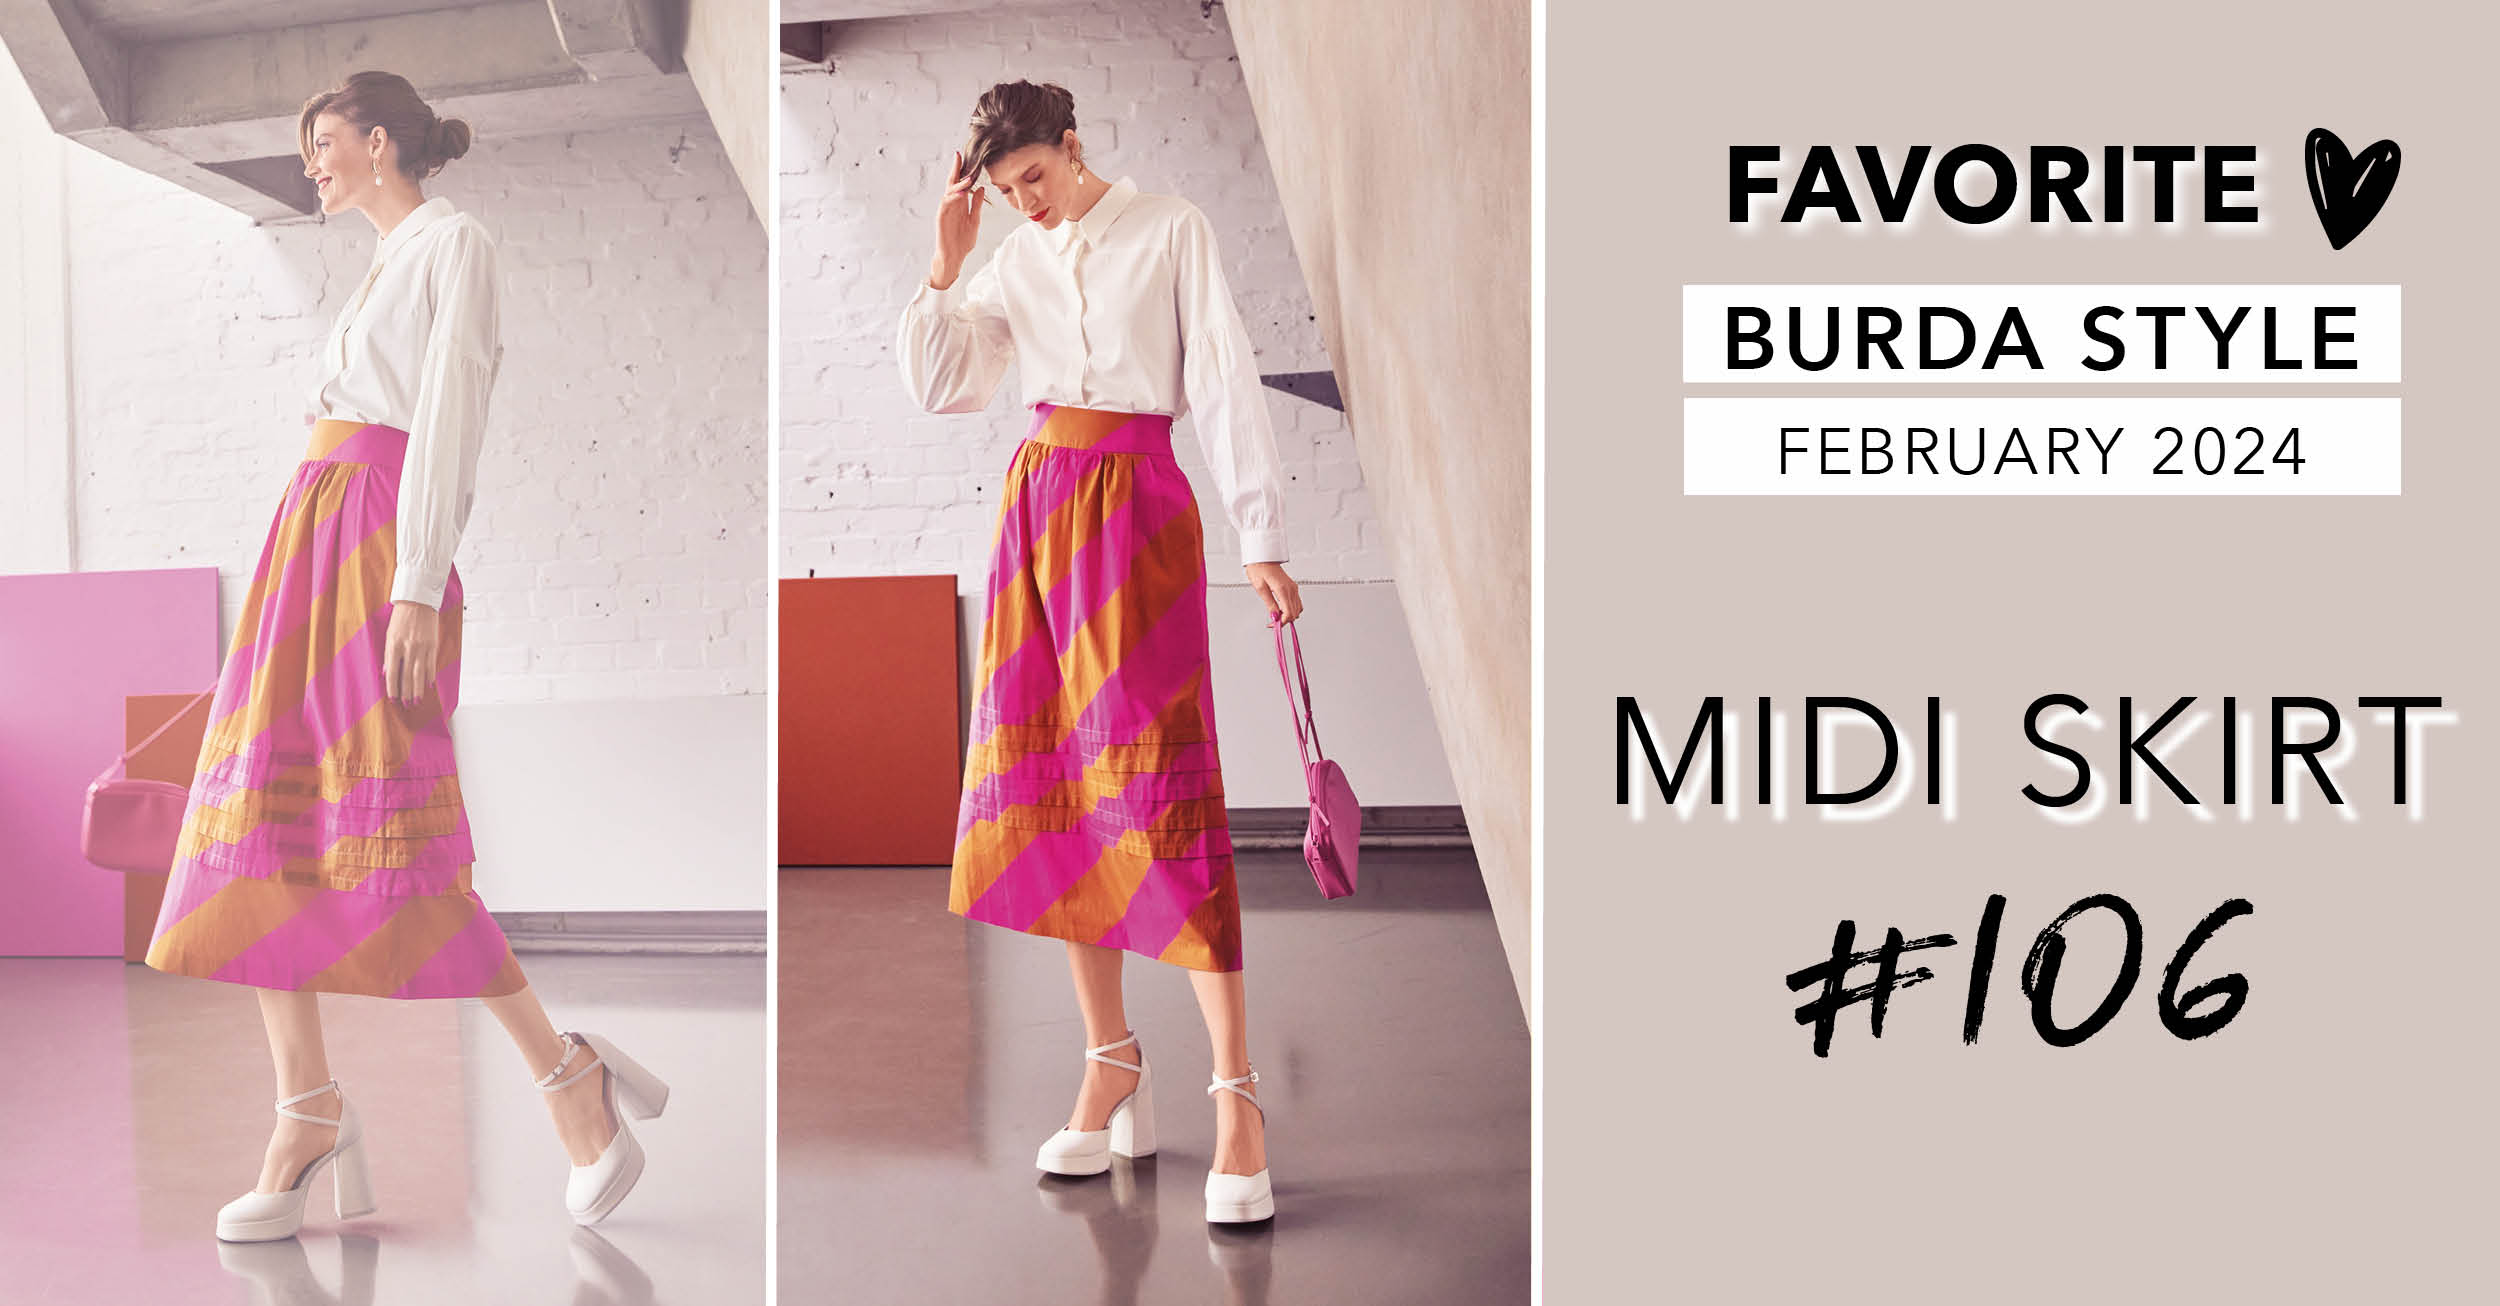 Favorite: The Skirt 106 from the February 2024 Issue of Burda Style